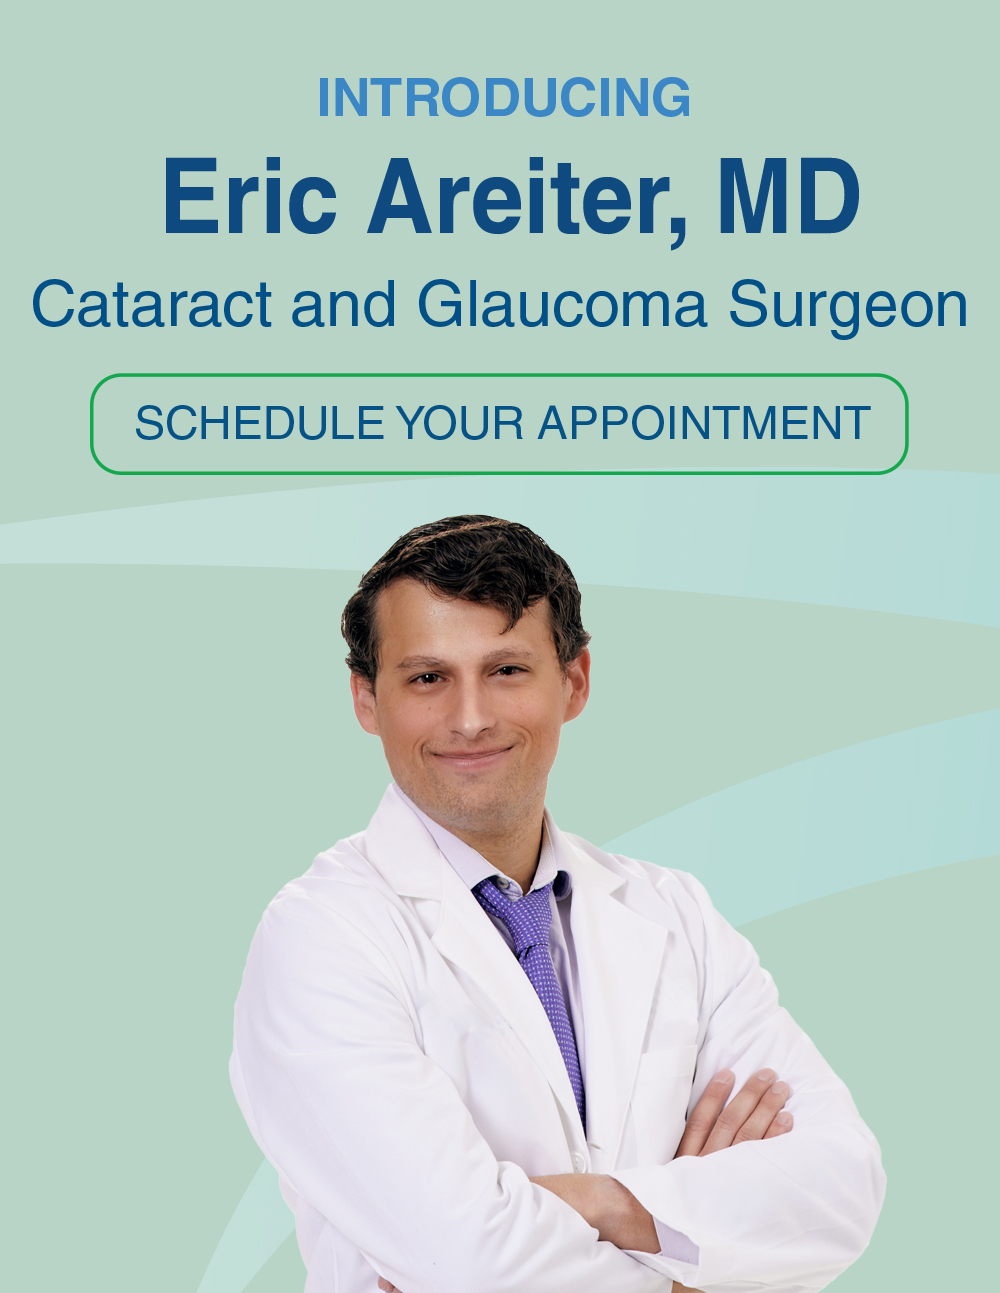 Dr. Eric Areiter, MD